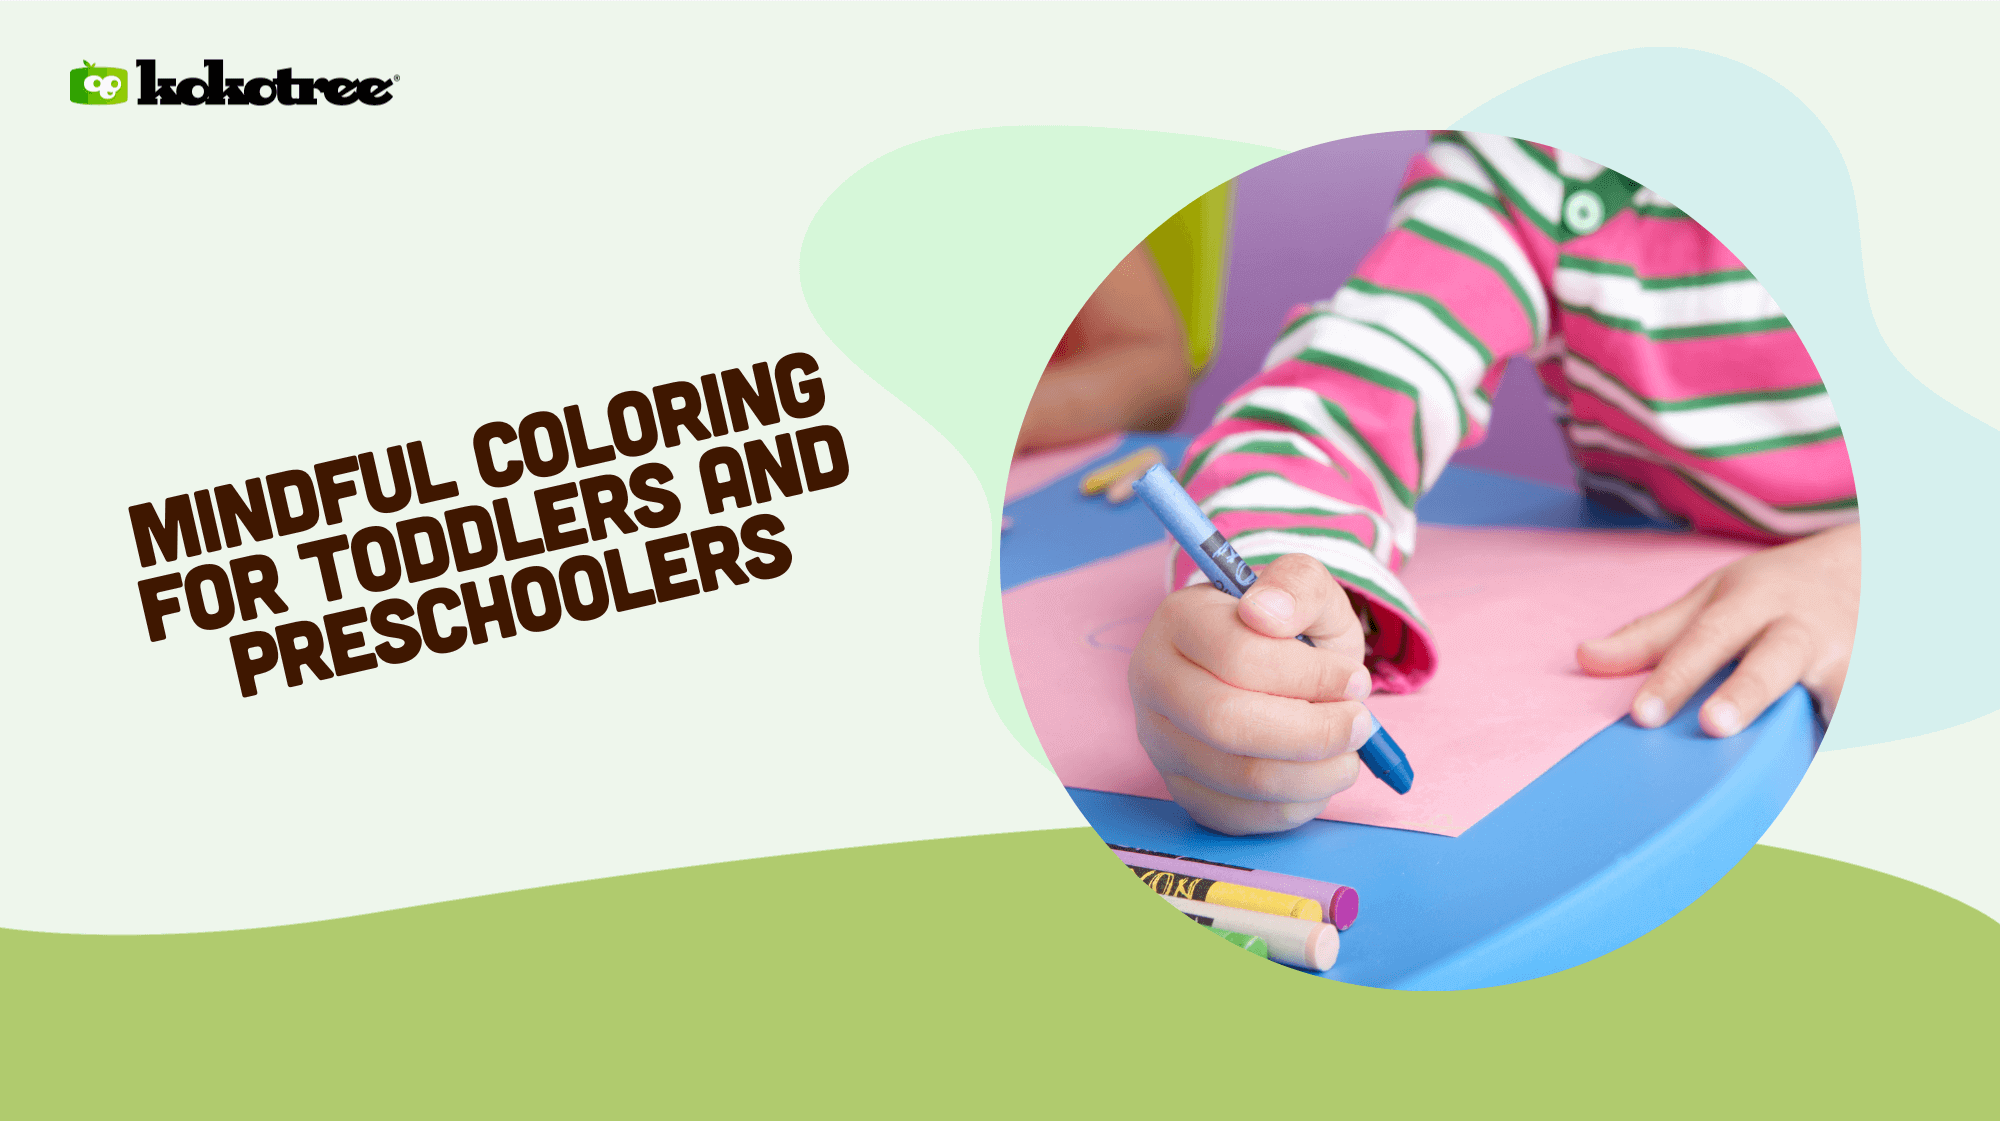 Coloring for Toddlers and Preschoolers